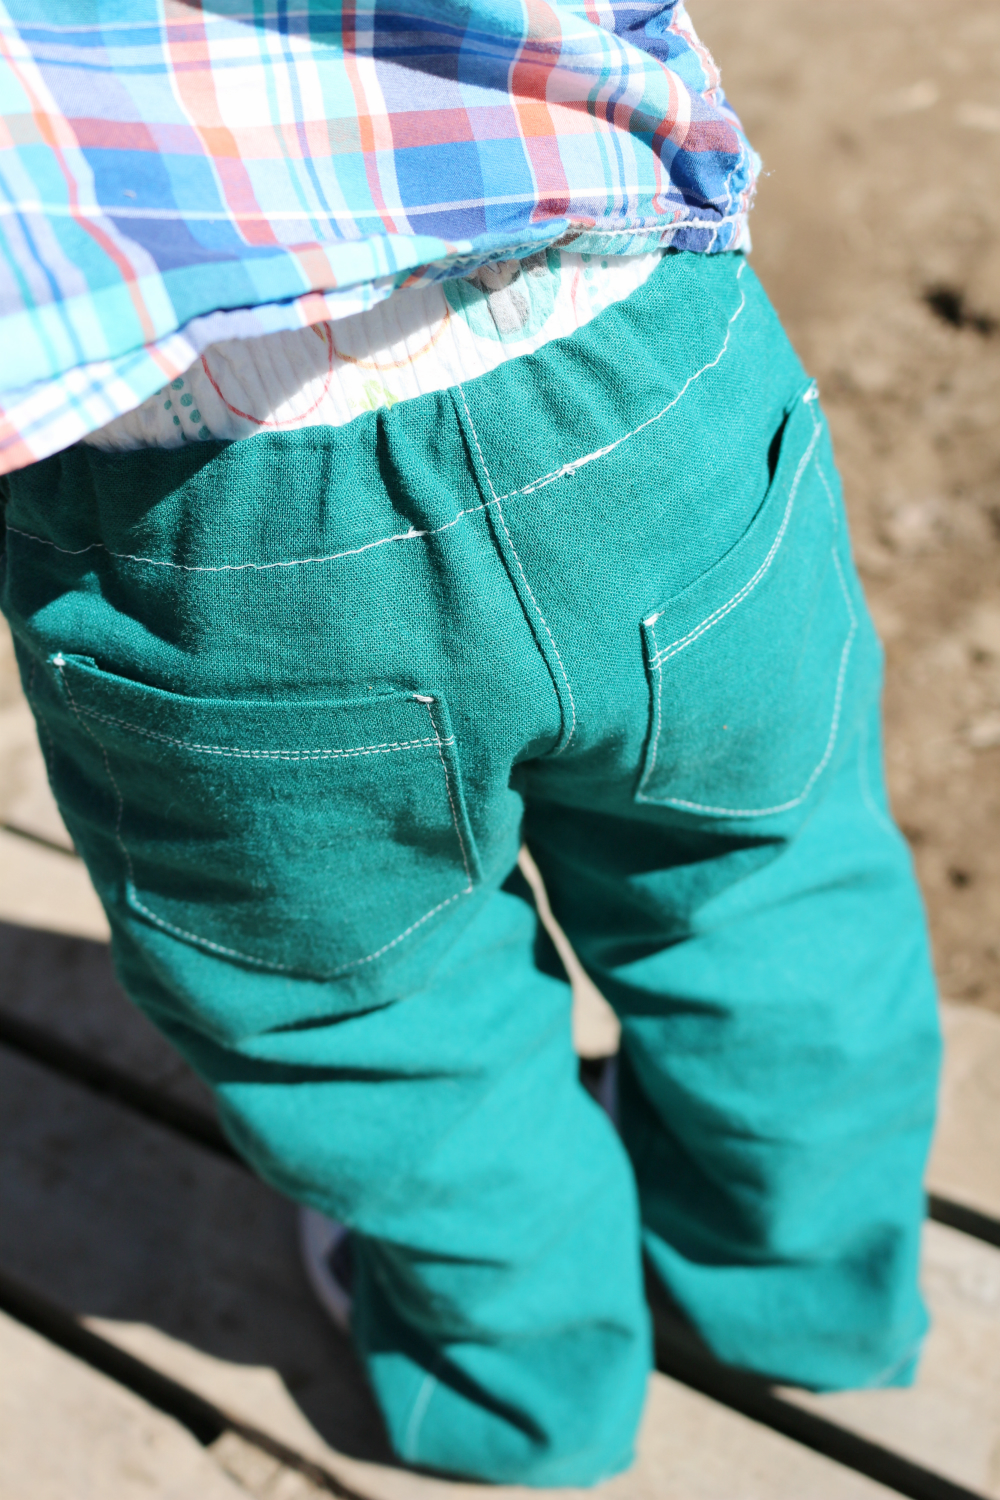 SeeMeSew: Teal pants for the win!